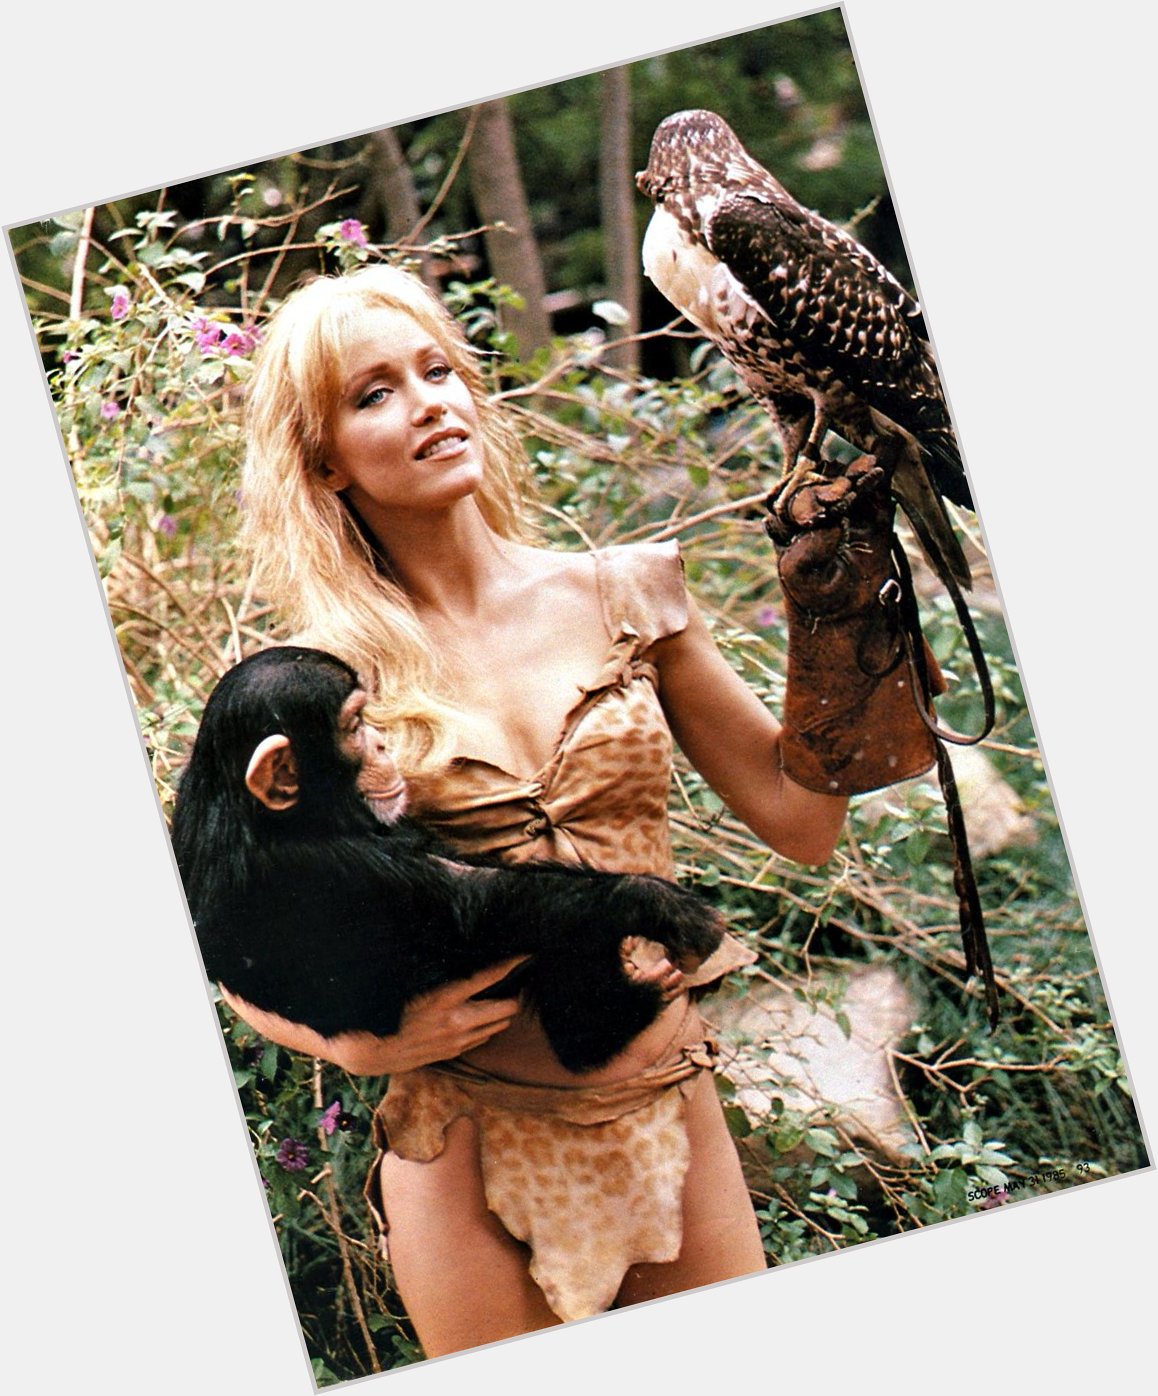 Happy birthday to Tanya Roberts, star of SHEENA, THE BEASTMASTER, TOURIST TRAP, A VIEW TO A KILL, and BODY SLAM! 